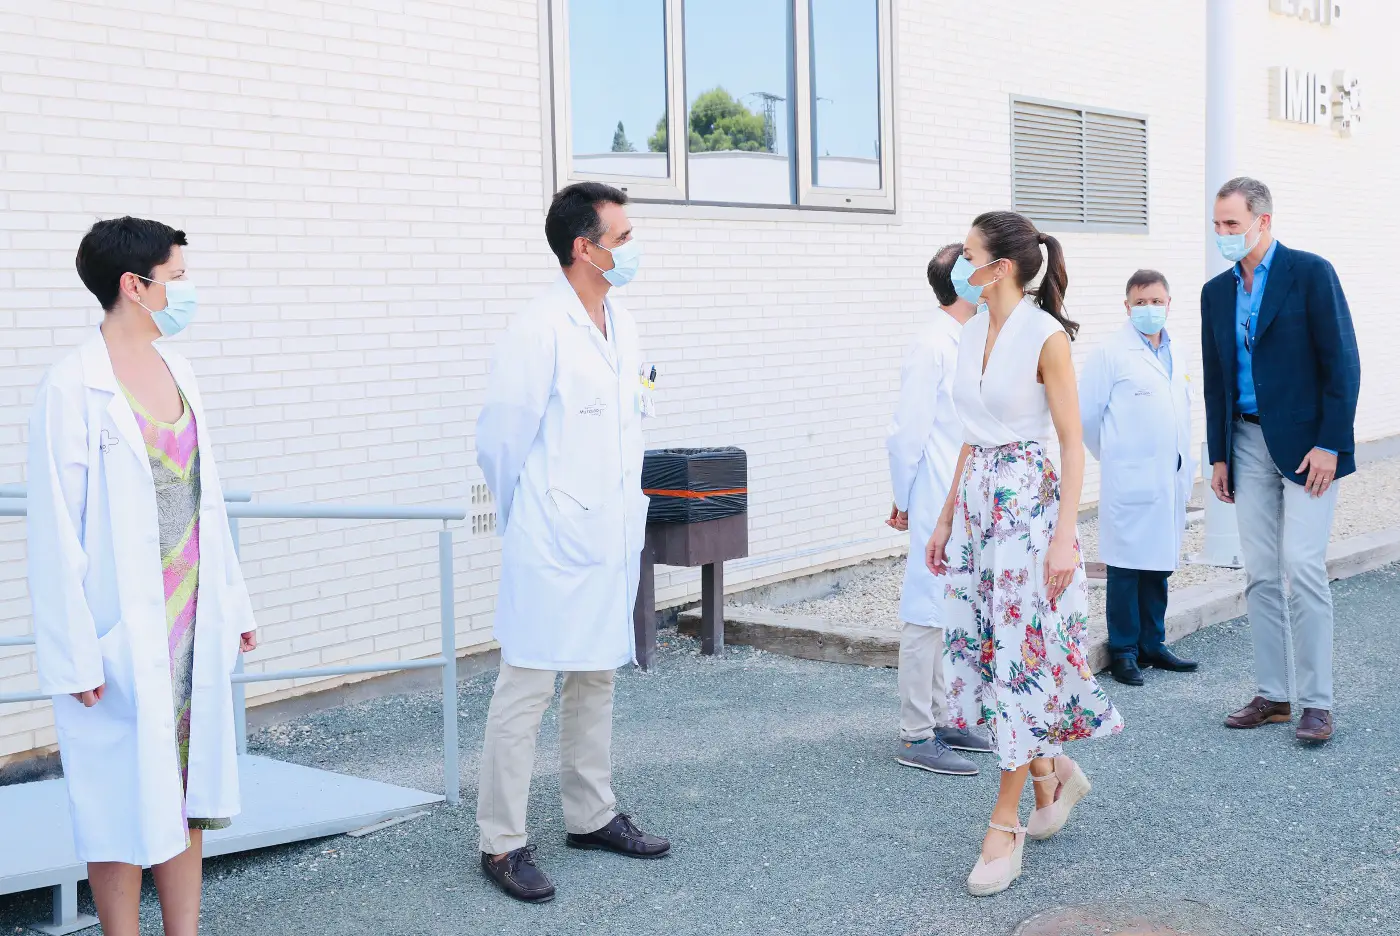 King Felipe and Queen Letizia visited the Murican Insitute for Biosanitry Research